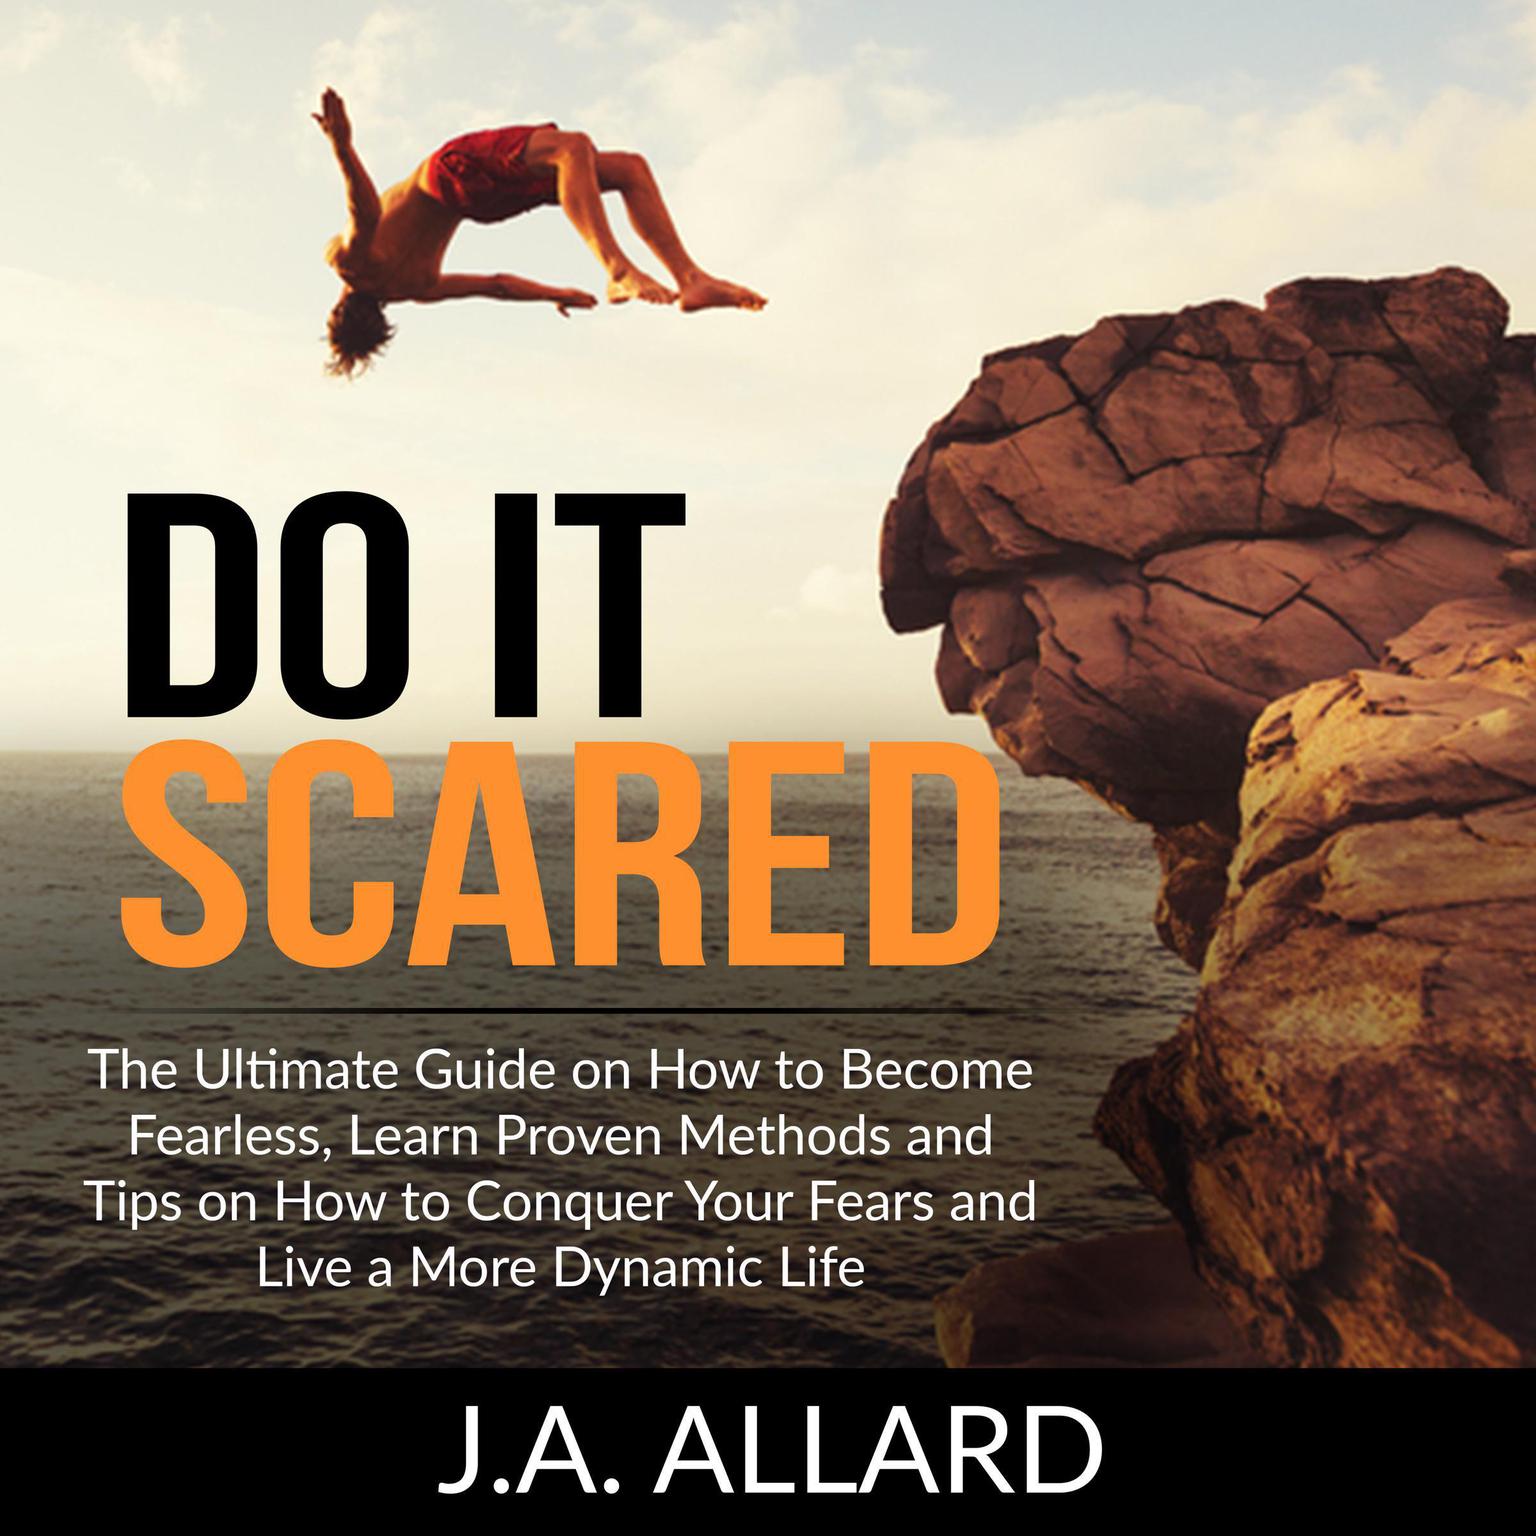 Do It Scared: The Ultimate Guide on How to Become Fearless, Learn Proven Methods and Tips on How to Conquer Your Fears and Live a More Dynamic Life  Audiobook, by J.A. Allard